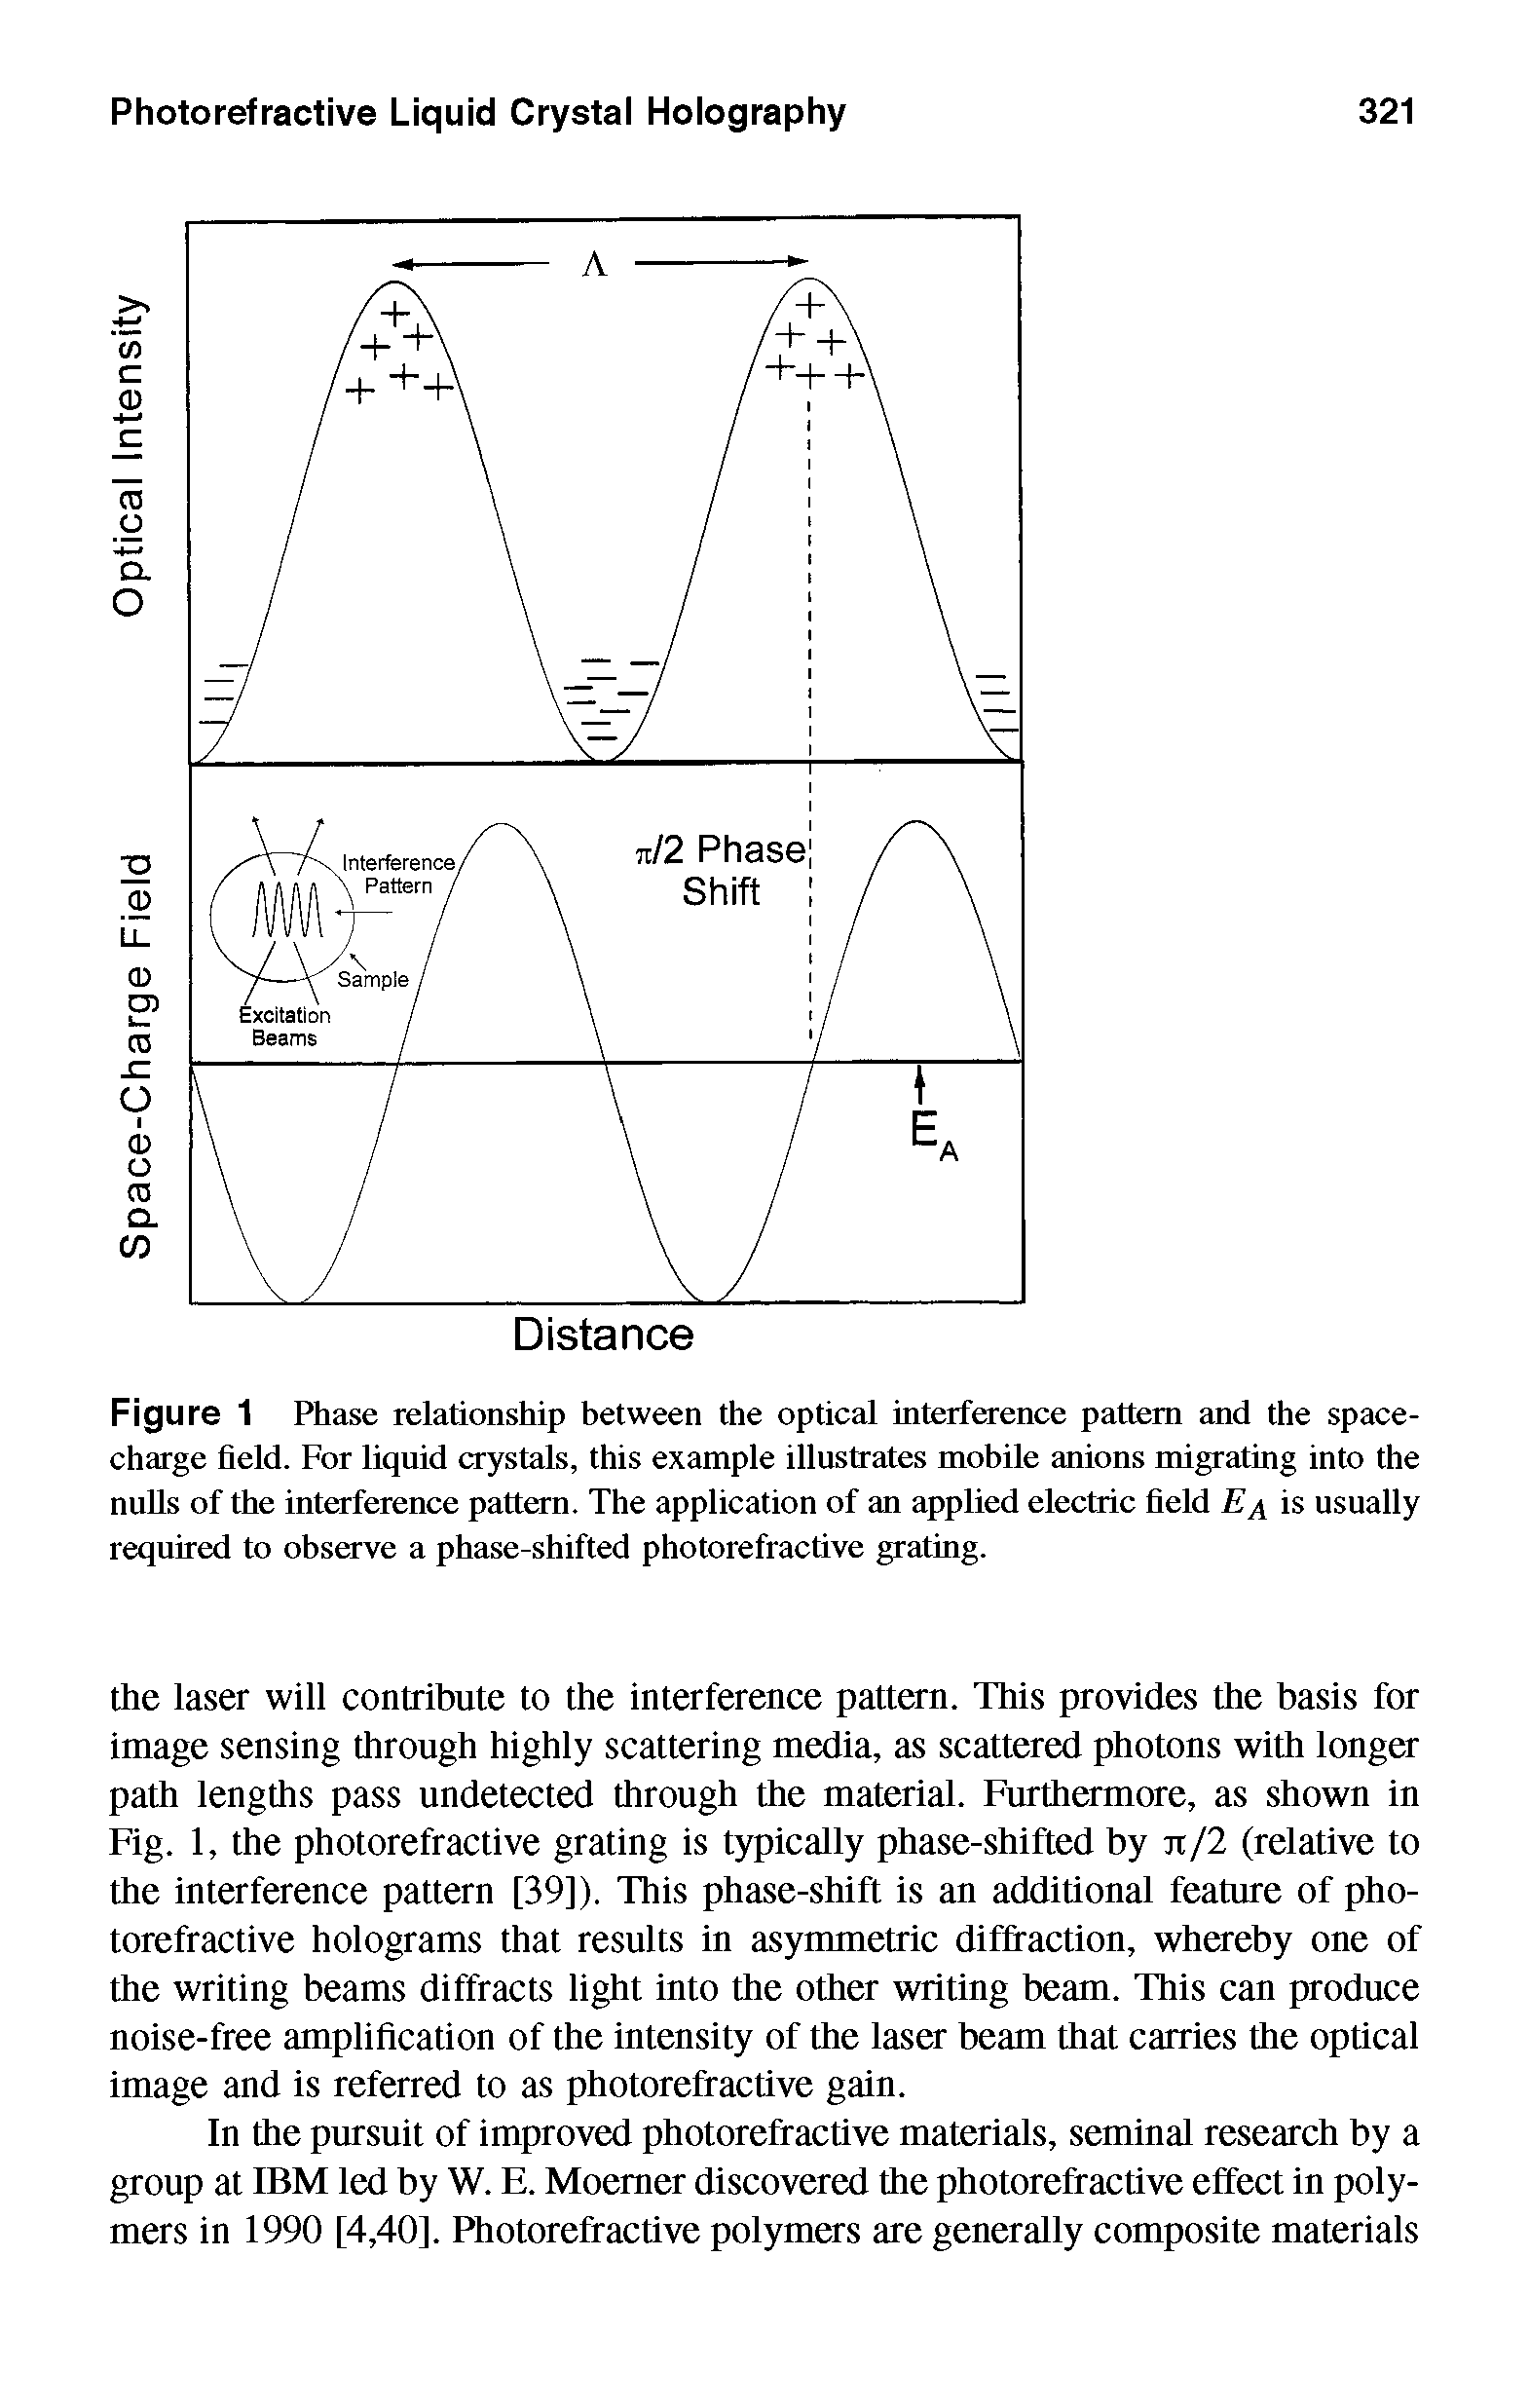 Figure 1 Phase relationship between the optical interference pattern and the space-charge field. For liquid crystals, this example illustrates mobile anions migrating into the nulls of the interference pattern. The application of an applied electric field Ej is usually required to observe a phase-shifted photorefractive grating.